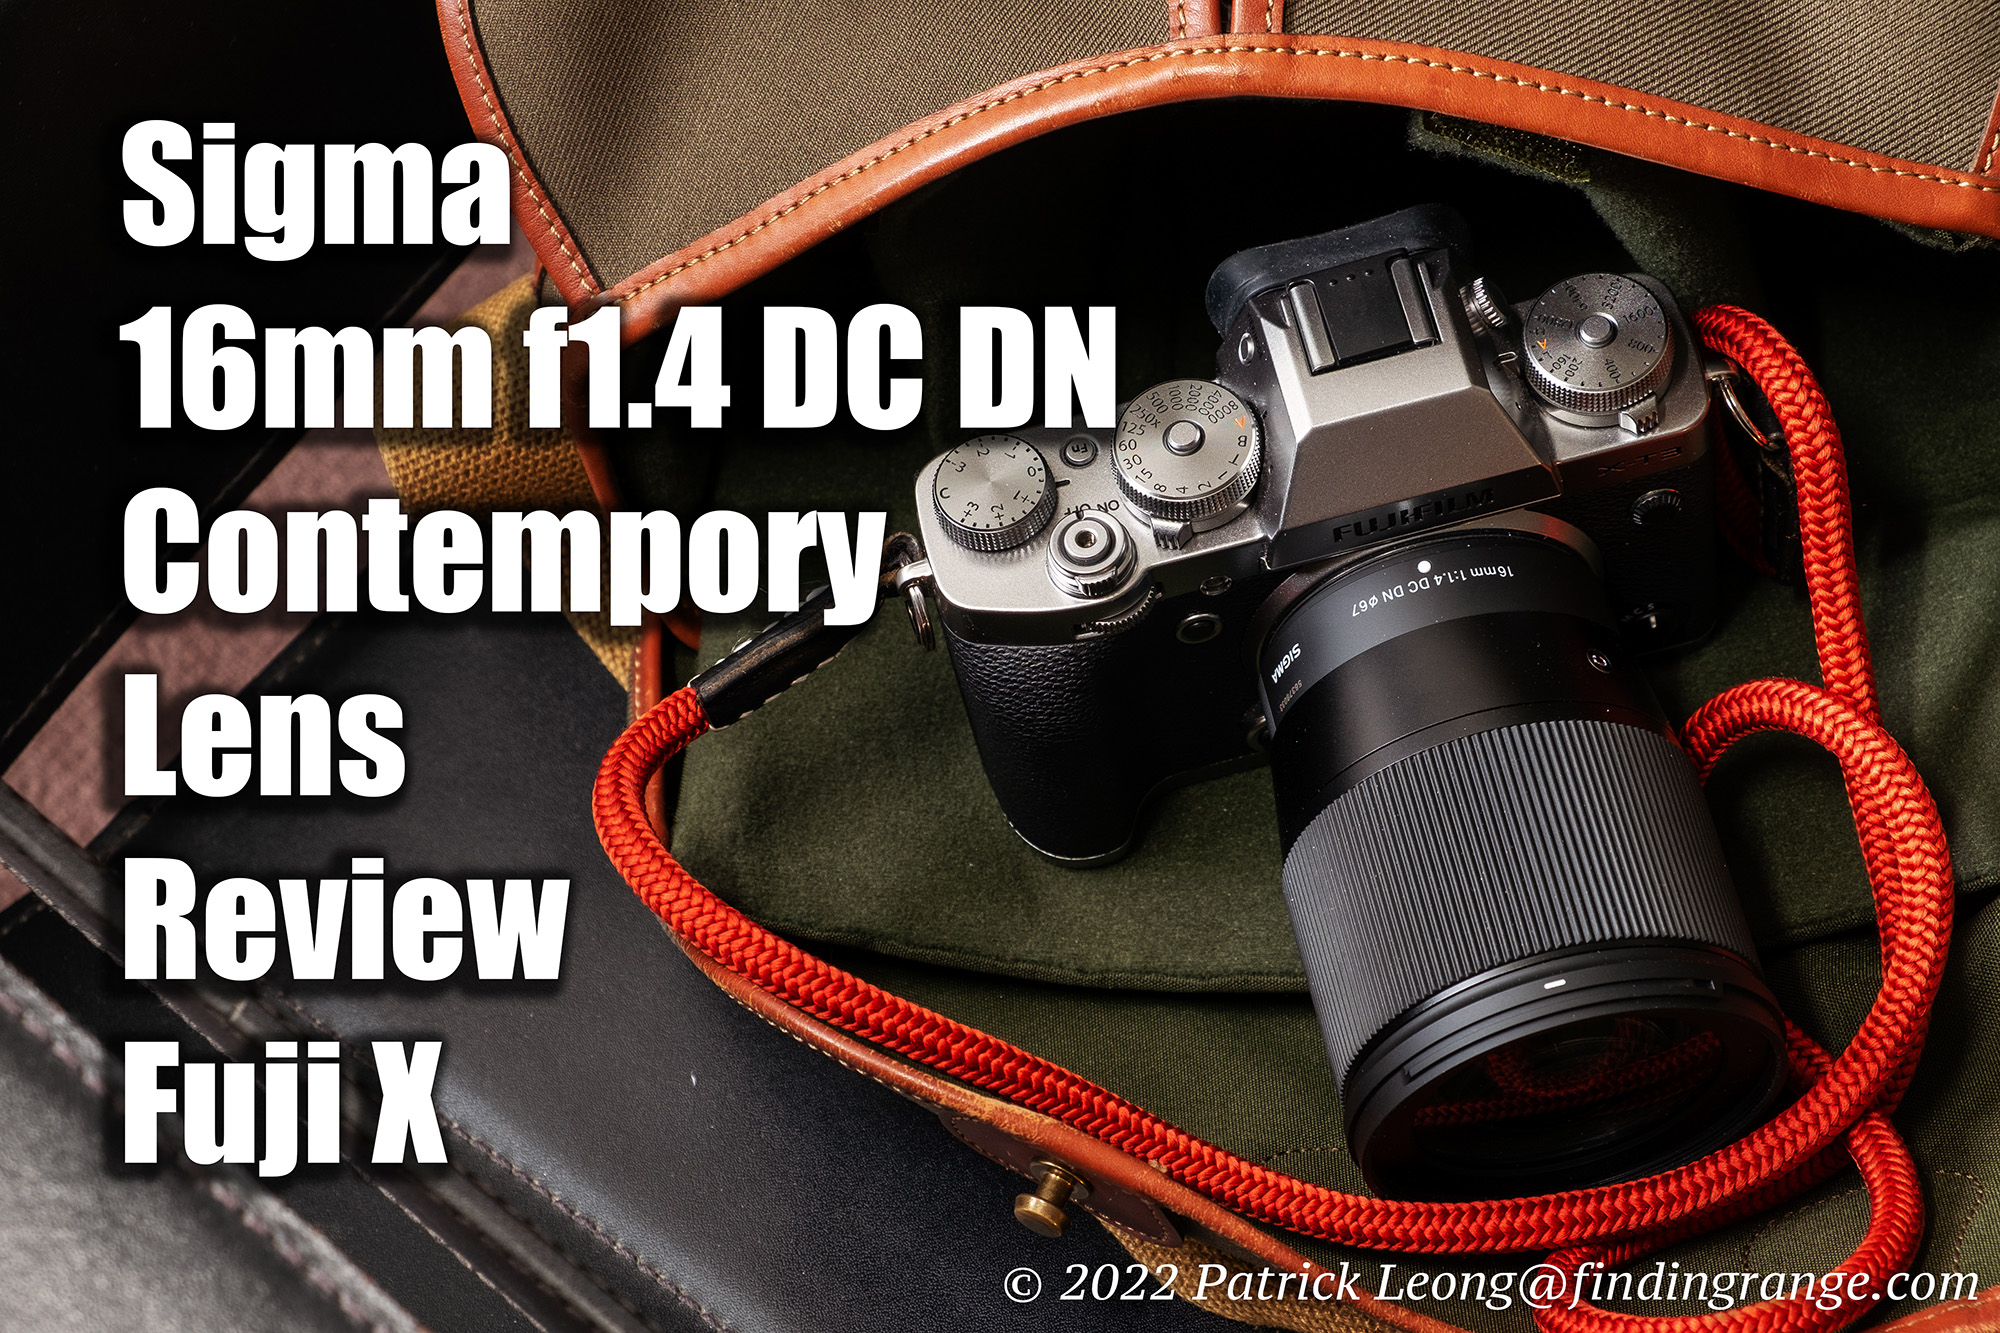 Sigma 16mm f1.4 DC DN Contemporary Review Fuji X - Finding Range